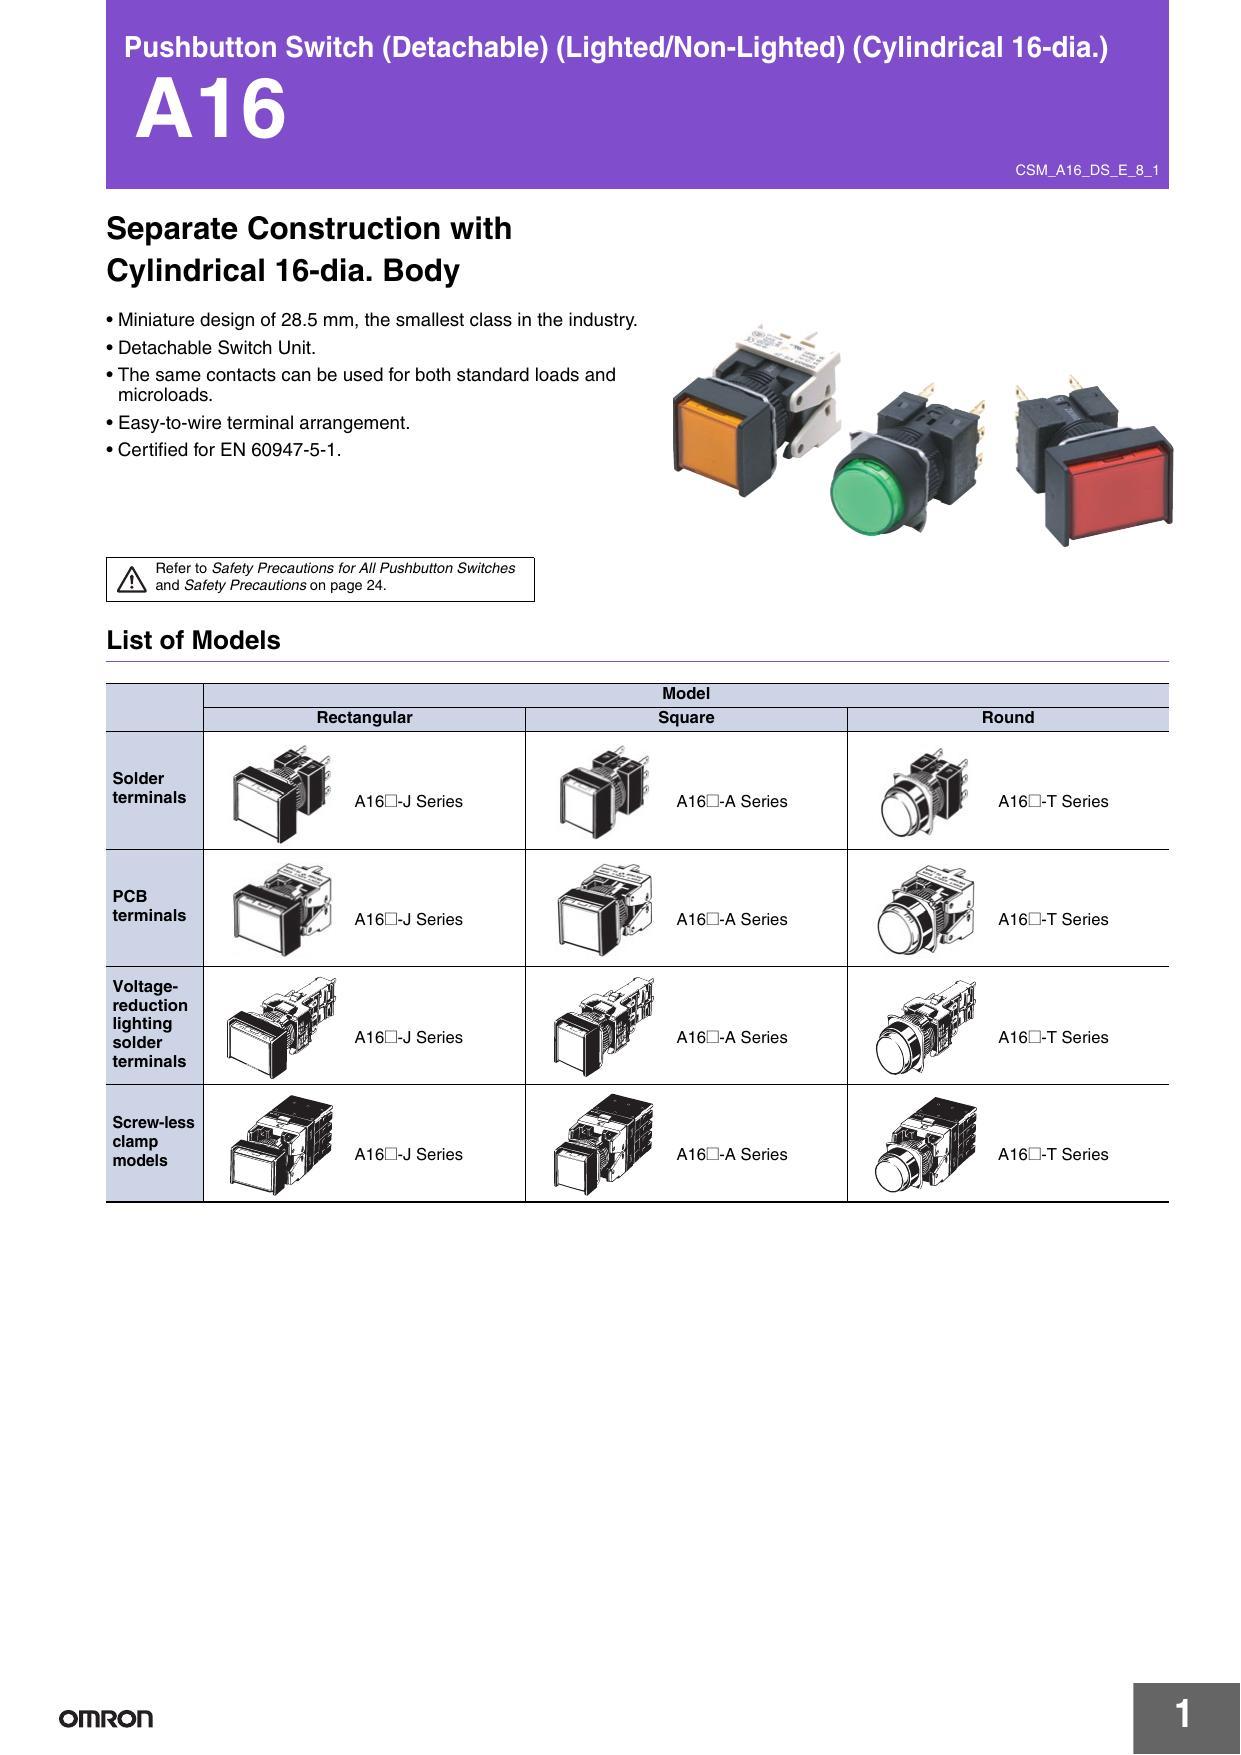 pushbutton-switch-detachable-lightednon-lighted-cylindrical-16-dia-a16-csma16dse81.pdf